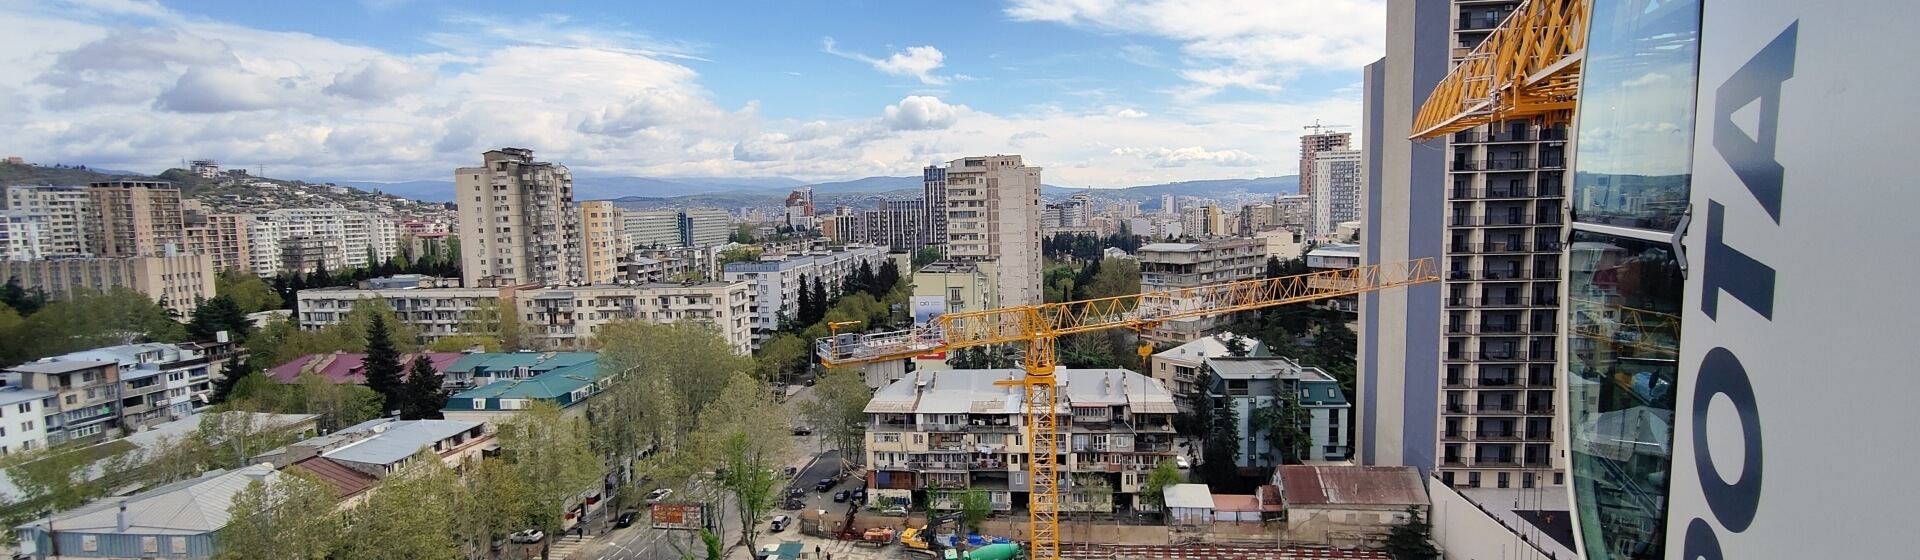 First-Potain-MCT-275-cranes-in-Georgia-build-prestigious-Central-Park-Towers-project.jpg